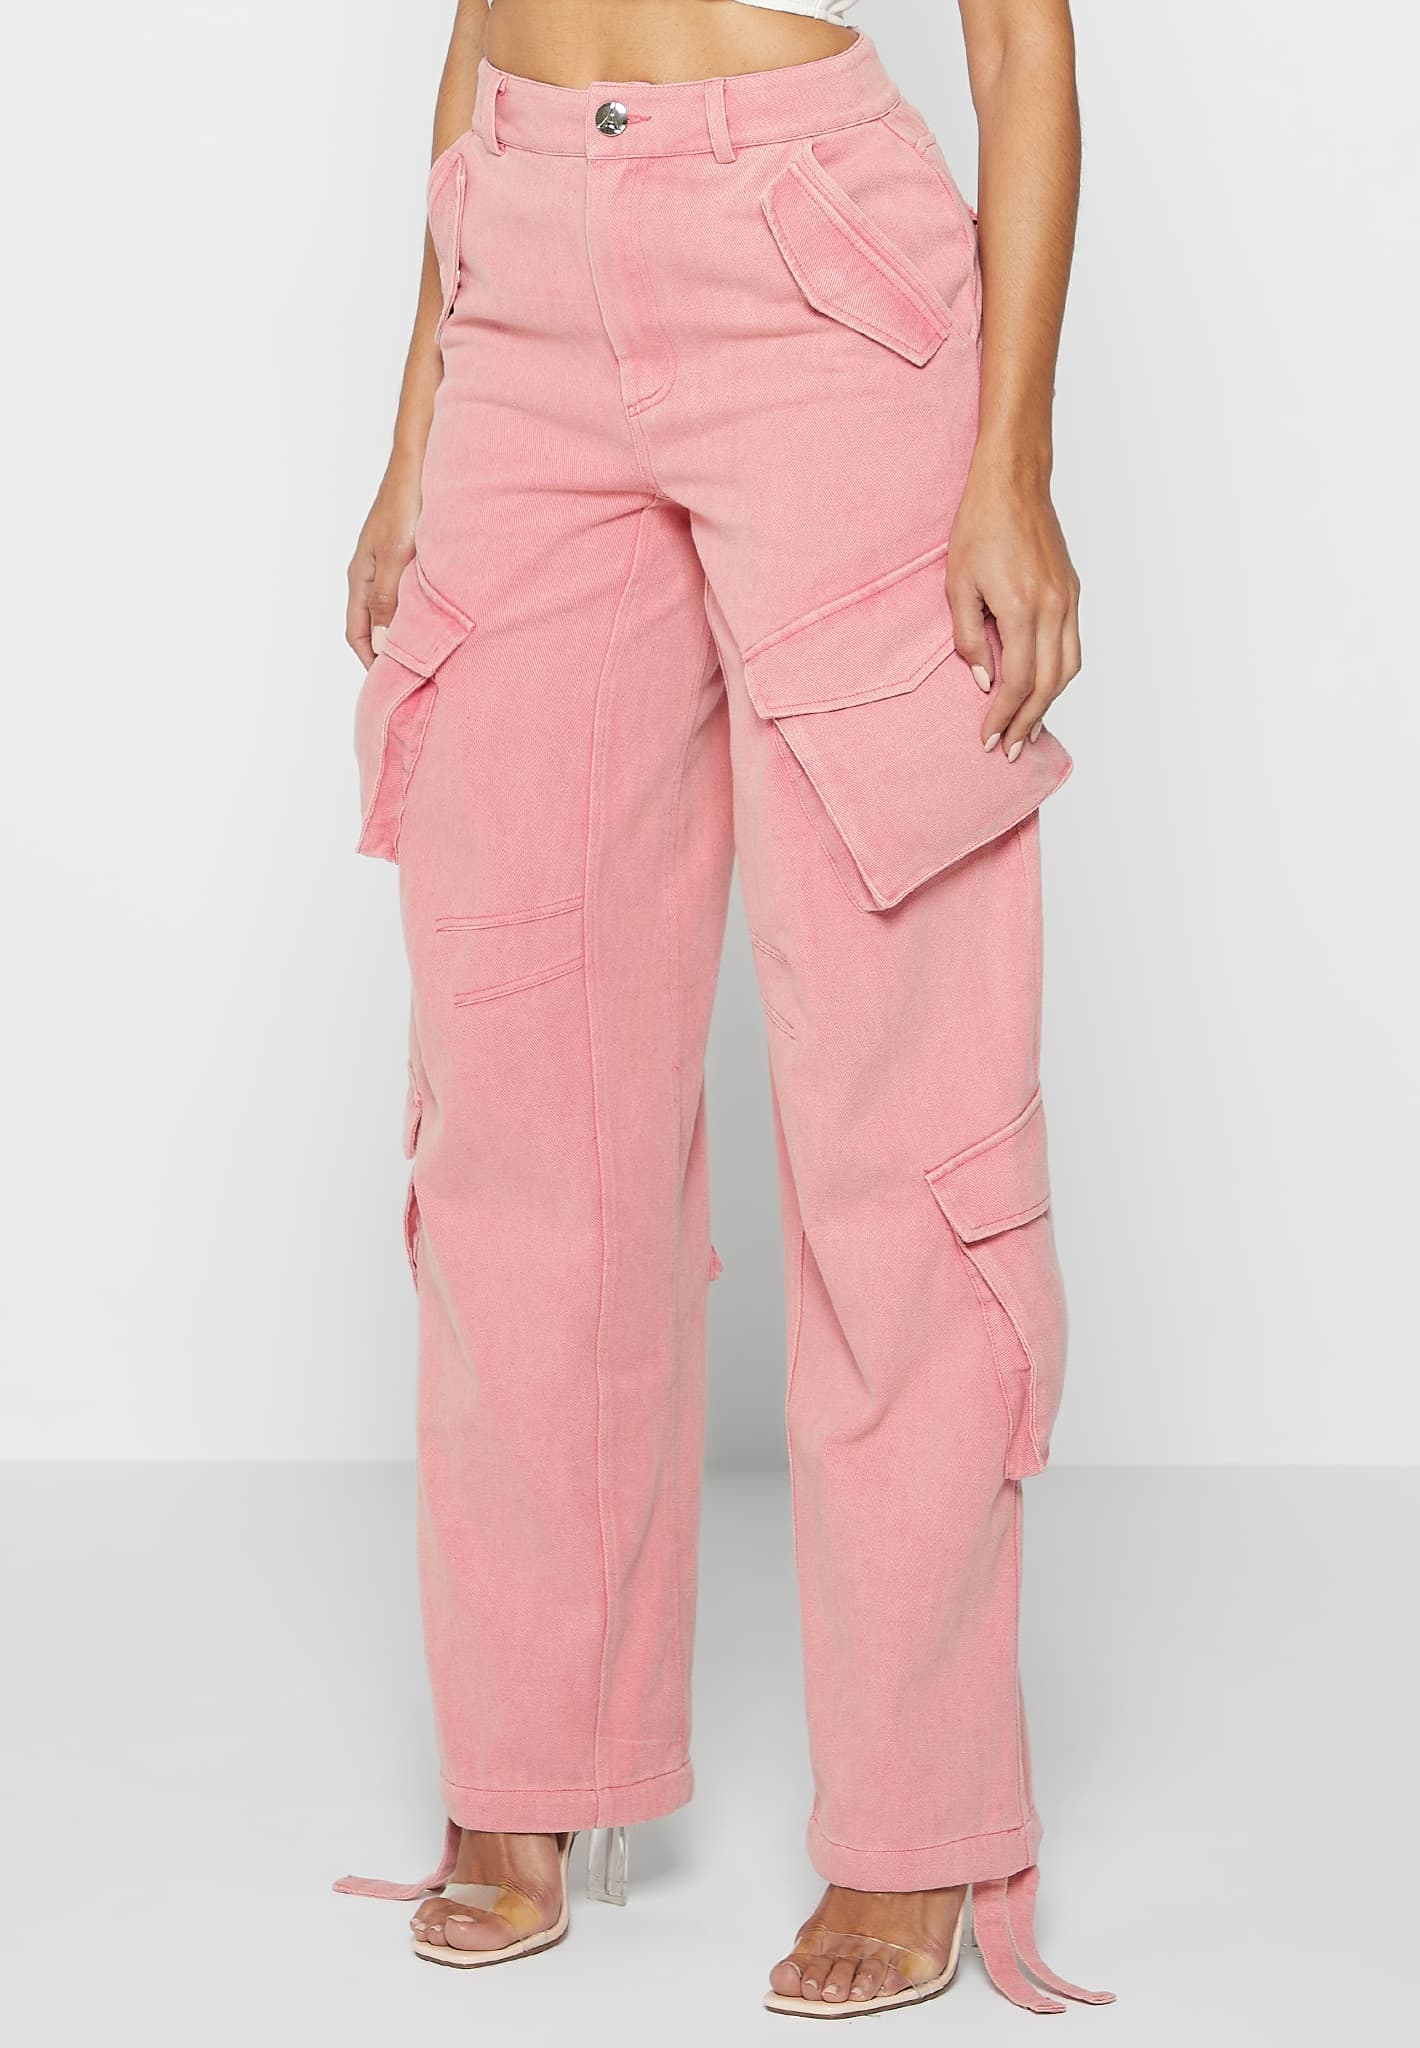 Cargo Pants - High Waisted - Full Length - Pink